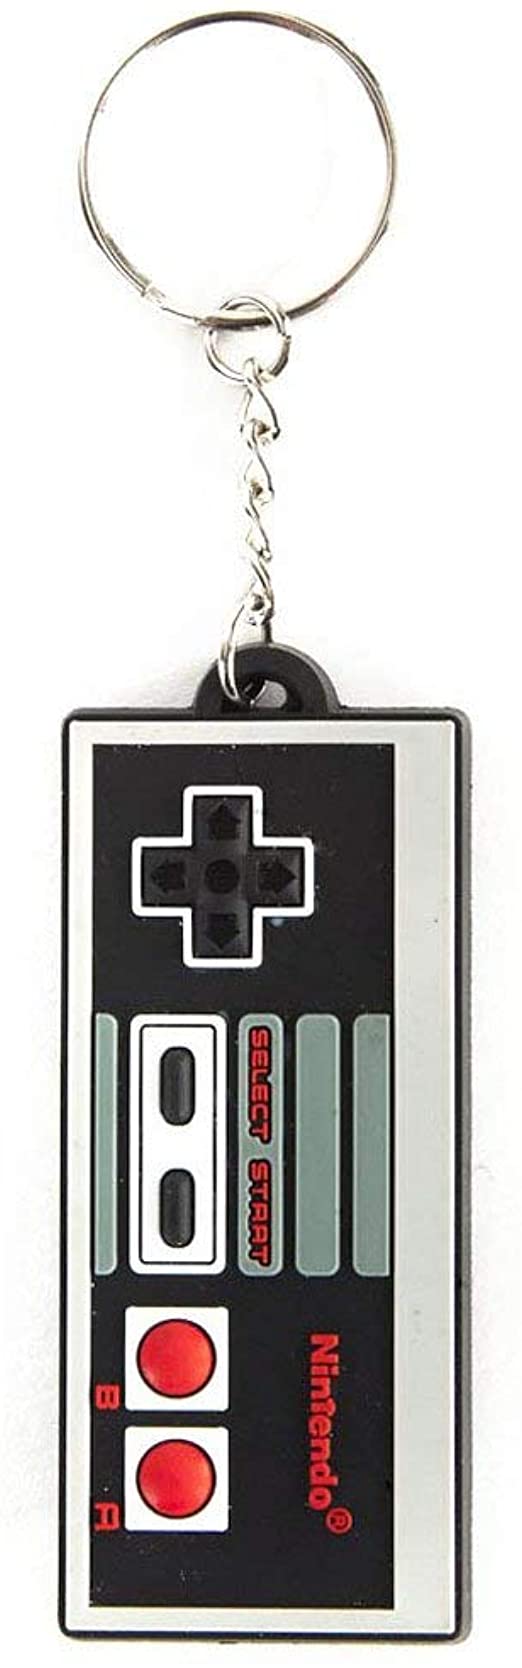 Classic NES Controller Keychain Rubber, Black, One Size